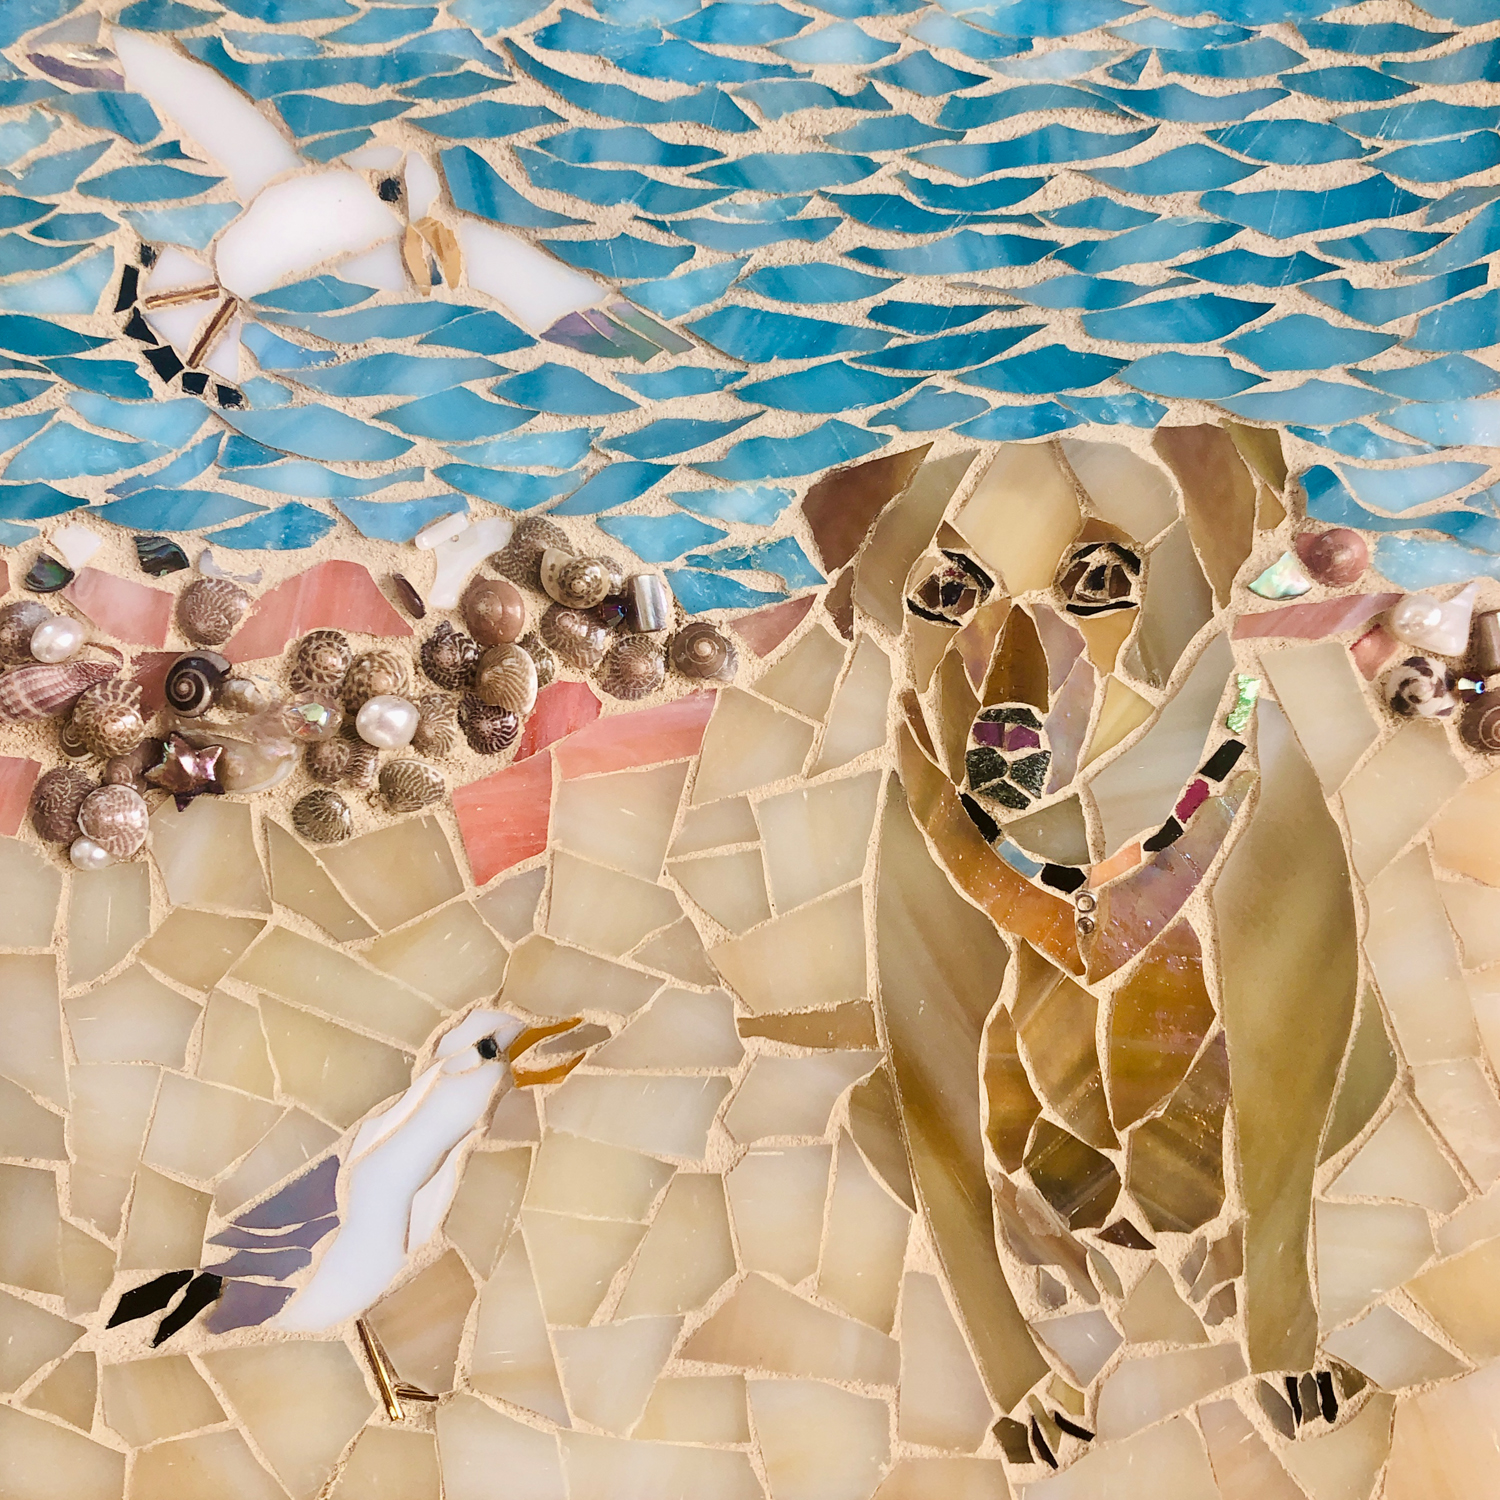 Mosaic of a dog named Riley with flying seagulls